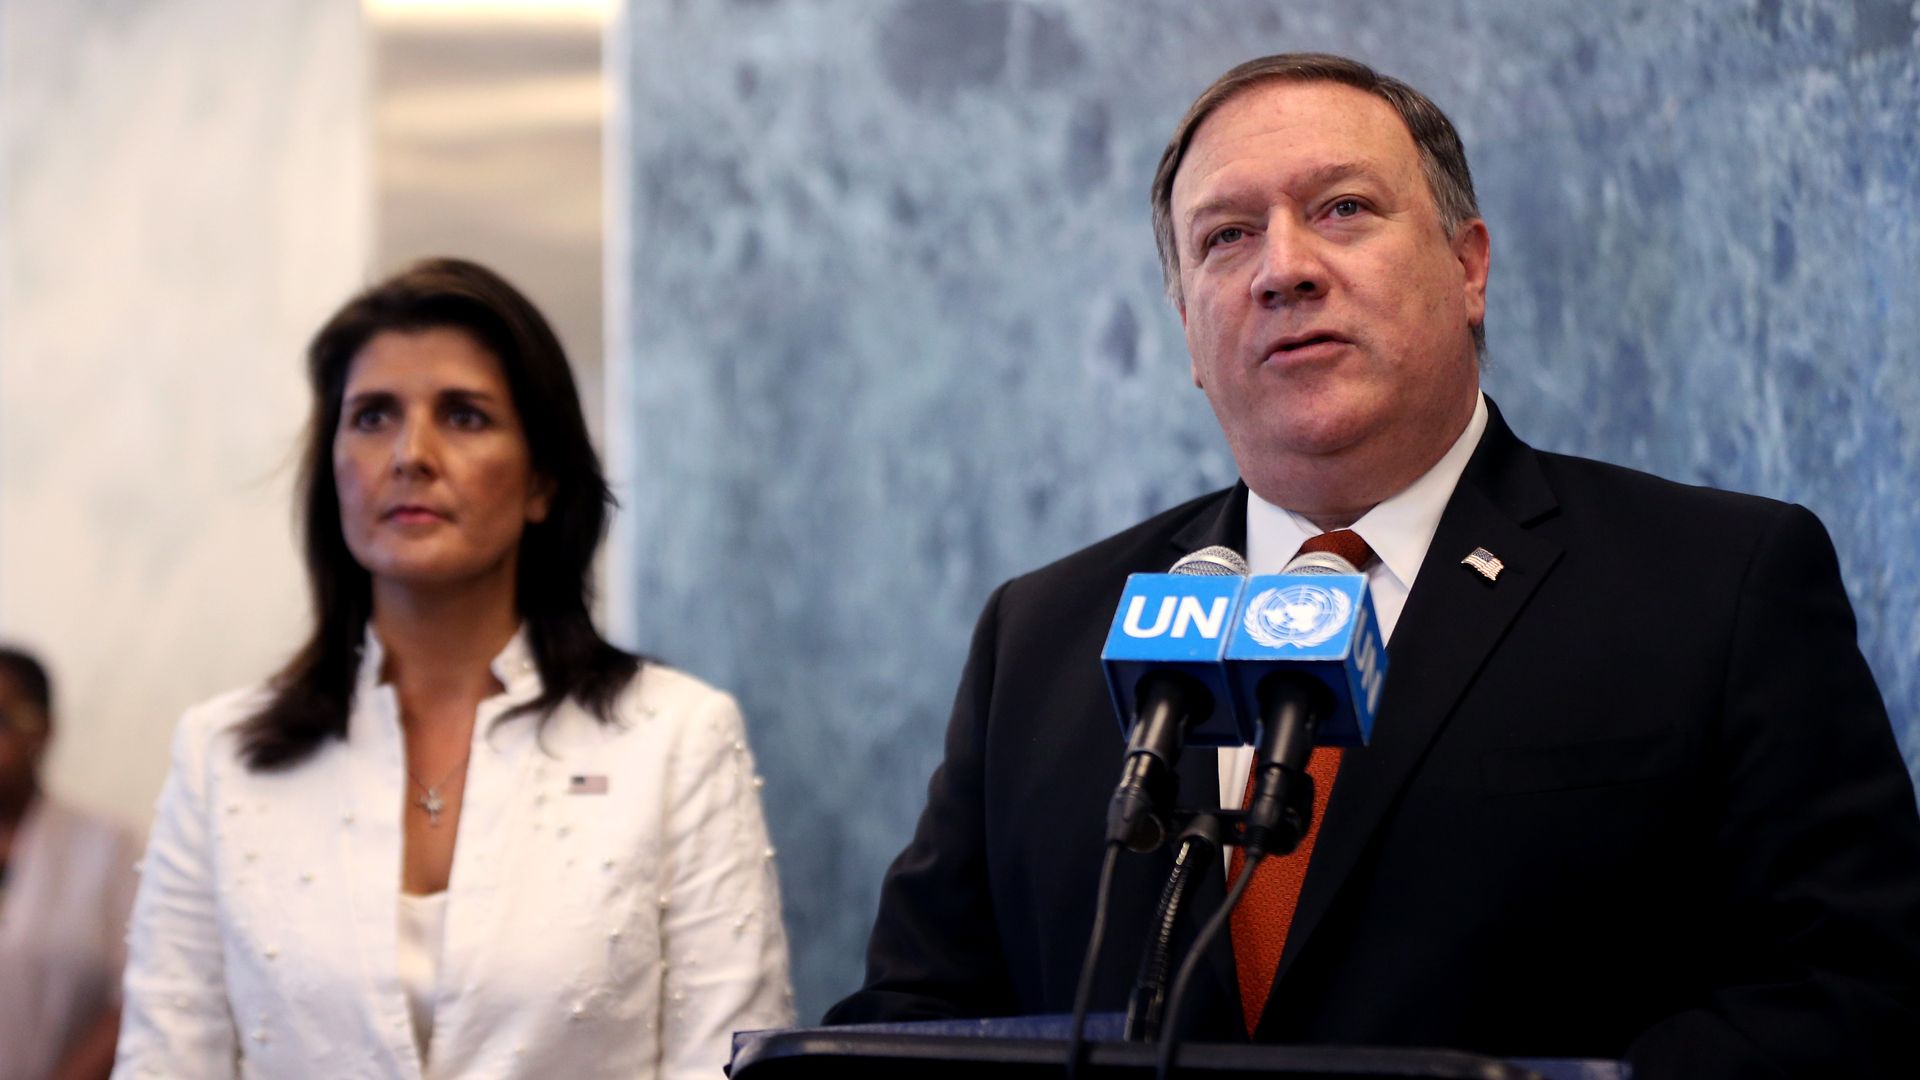 US Secretary of State Mike Pompeo and US Ambassador to the UN Nikki Haley address the media after their meeting with UN Secretary General at United Nations Headquarters in New York